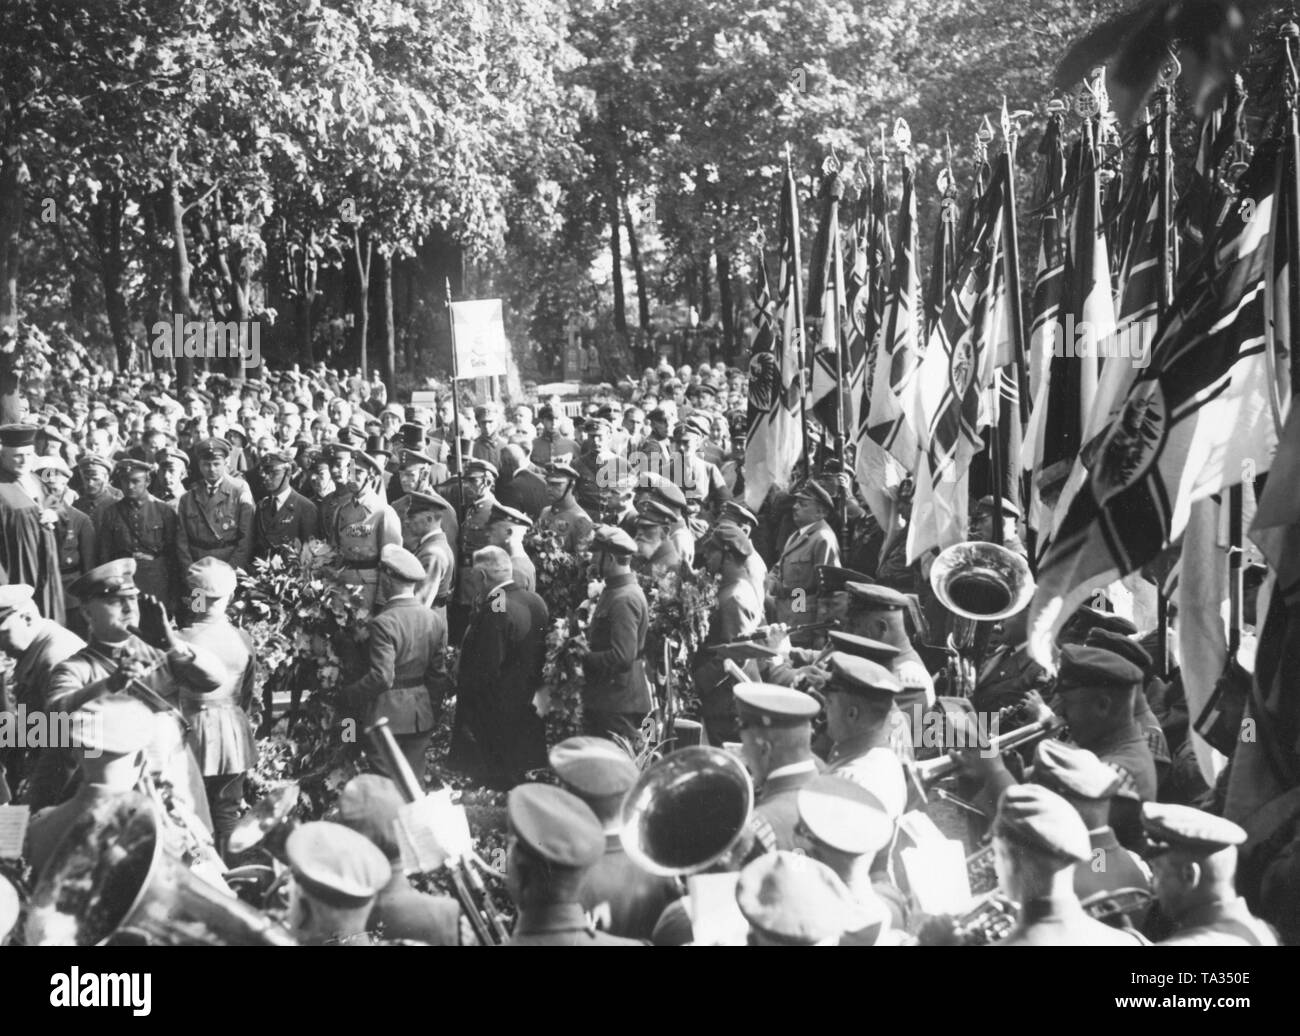 At the funeral of the Stahlhelm member Maurice August Hahn, who had been murdered by Communists, a mourning ceremony of the Stahlhelm was held in Friedrichsfelde cemetery. The deceased is honored with flags and a music band. Stock Photo